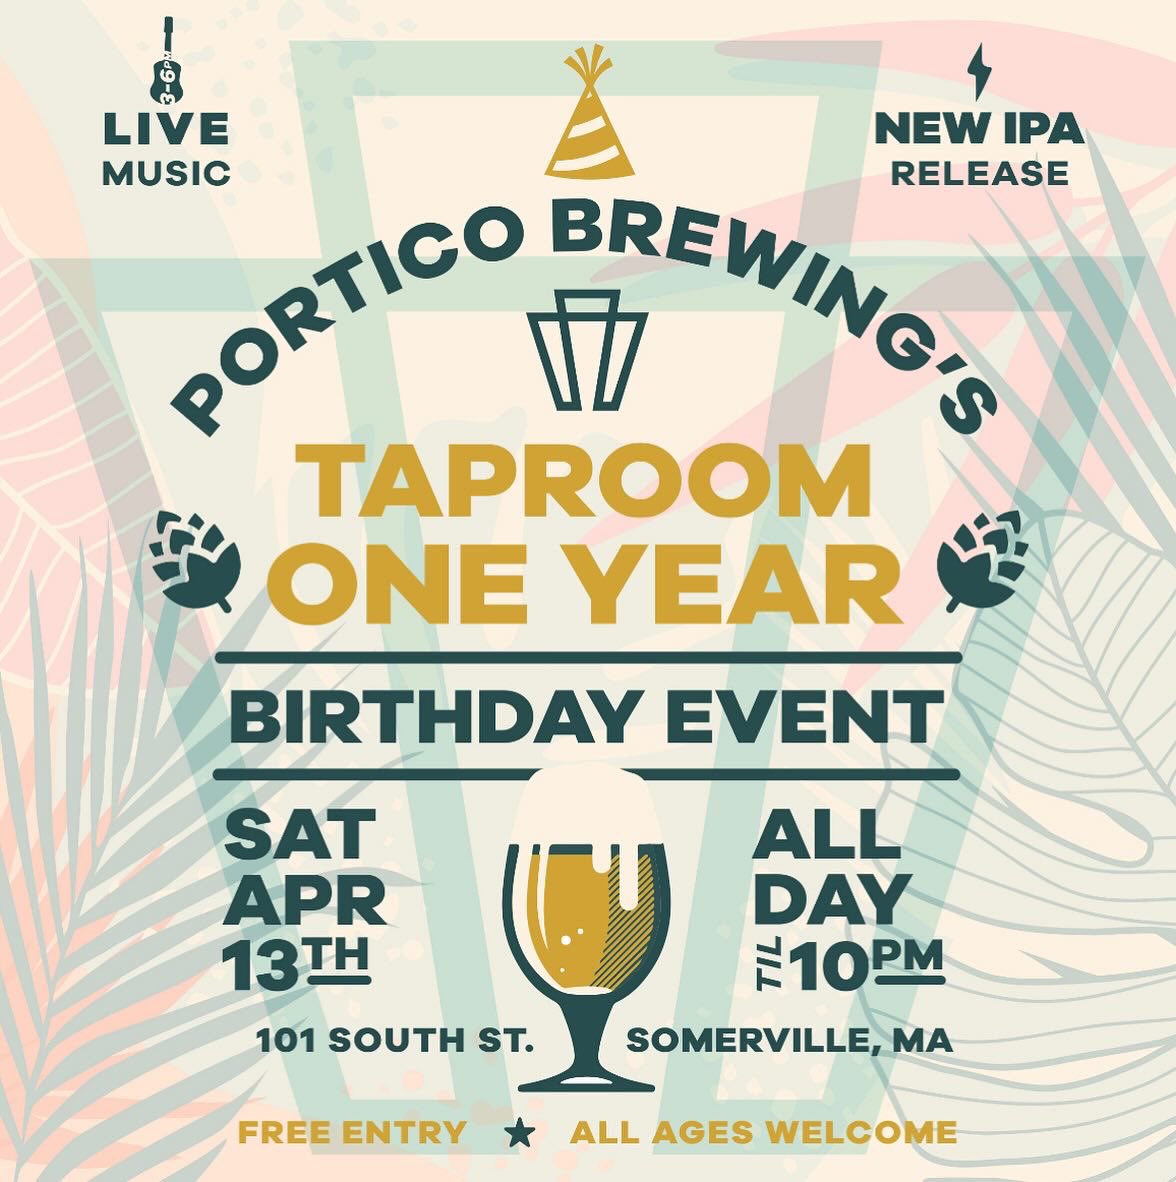 Our taproom turns 1 on 4/13, come celebrate with us.